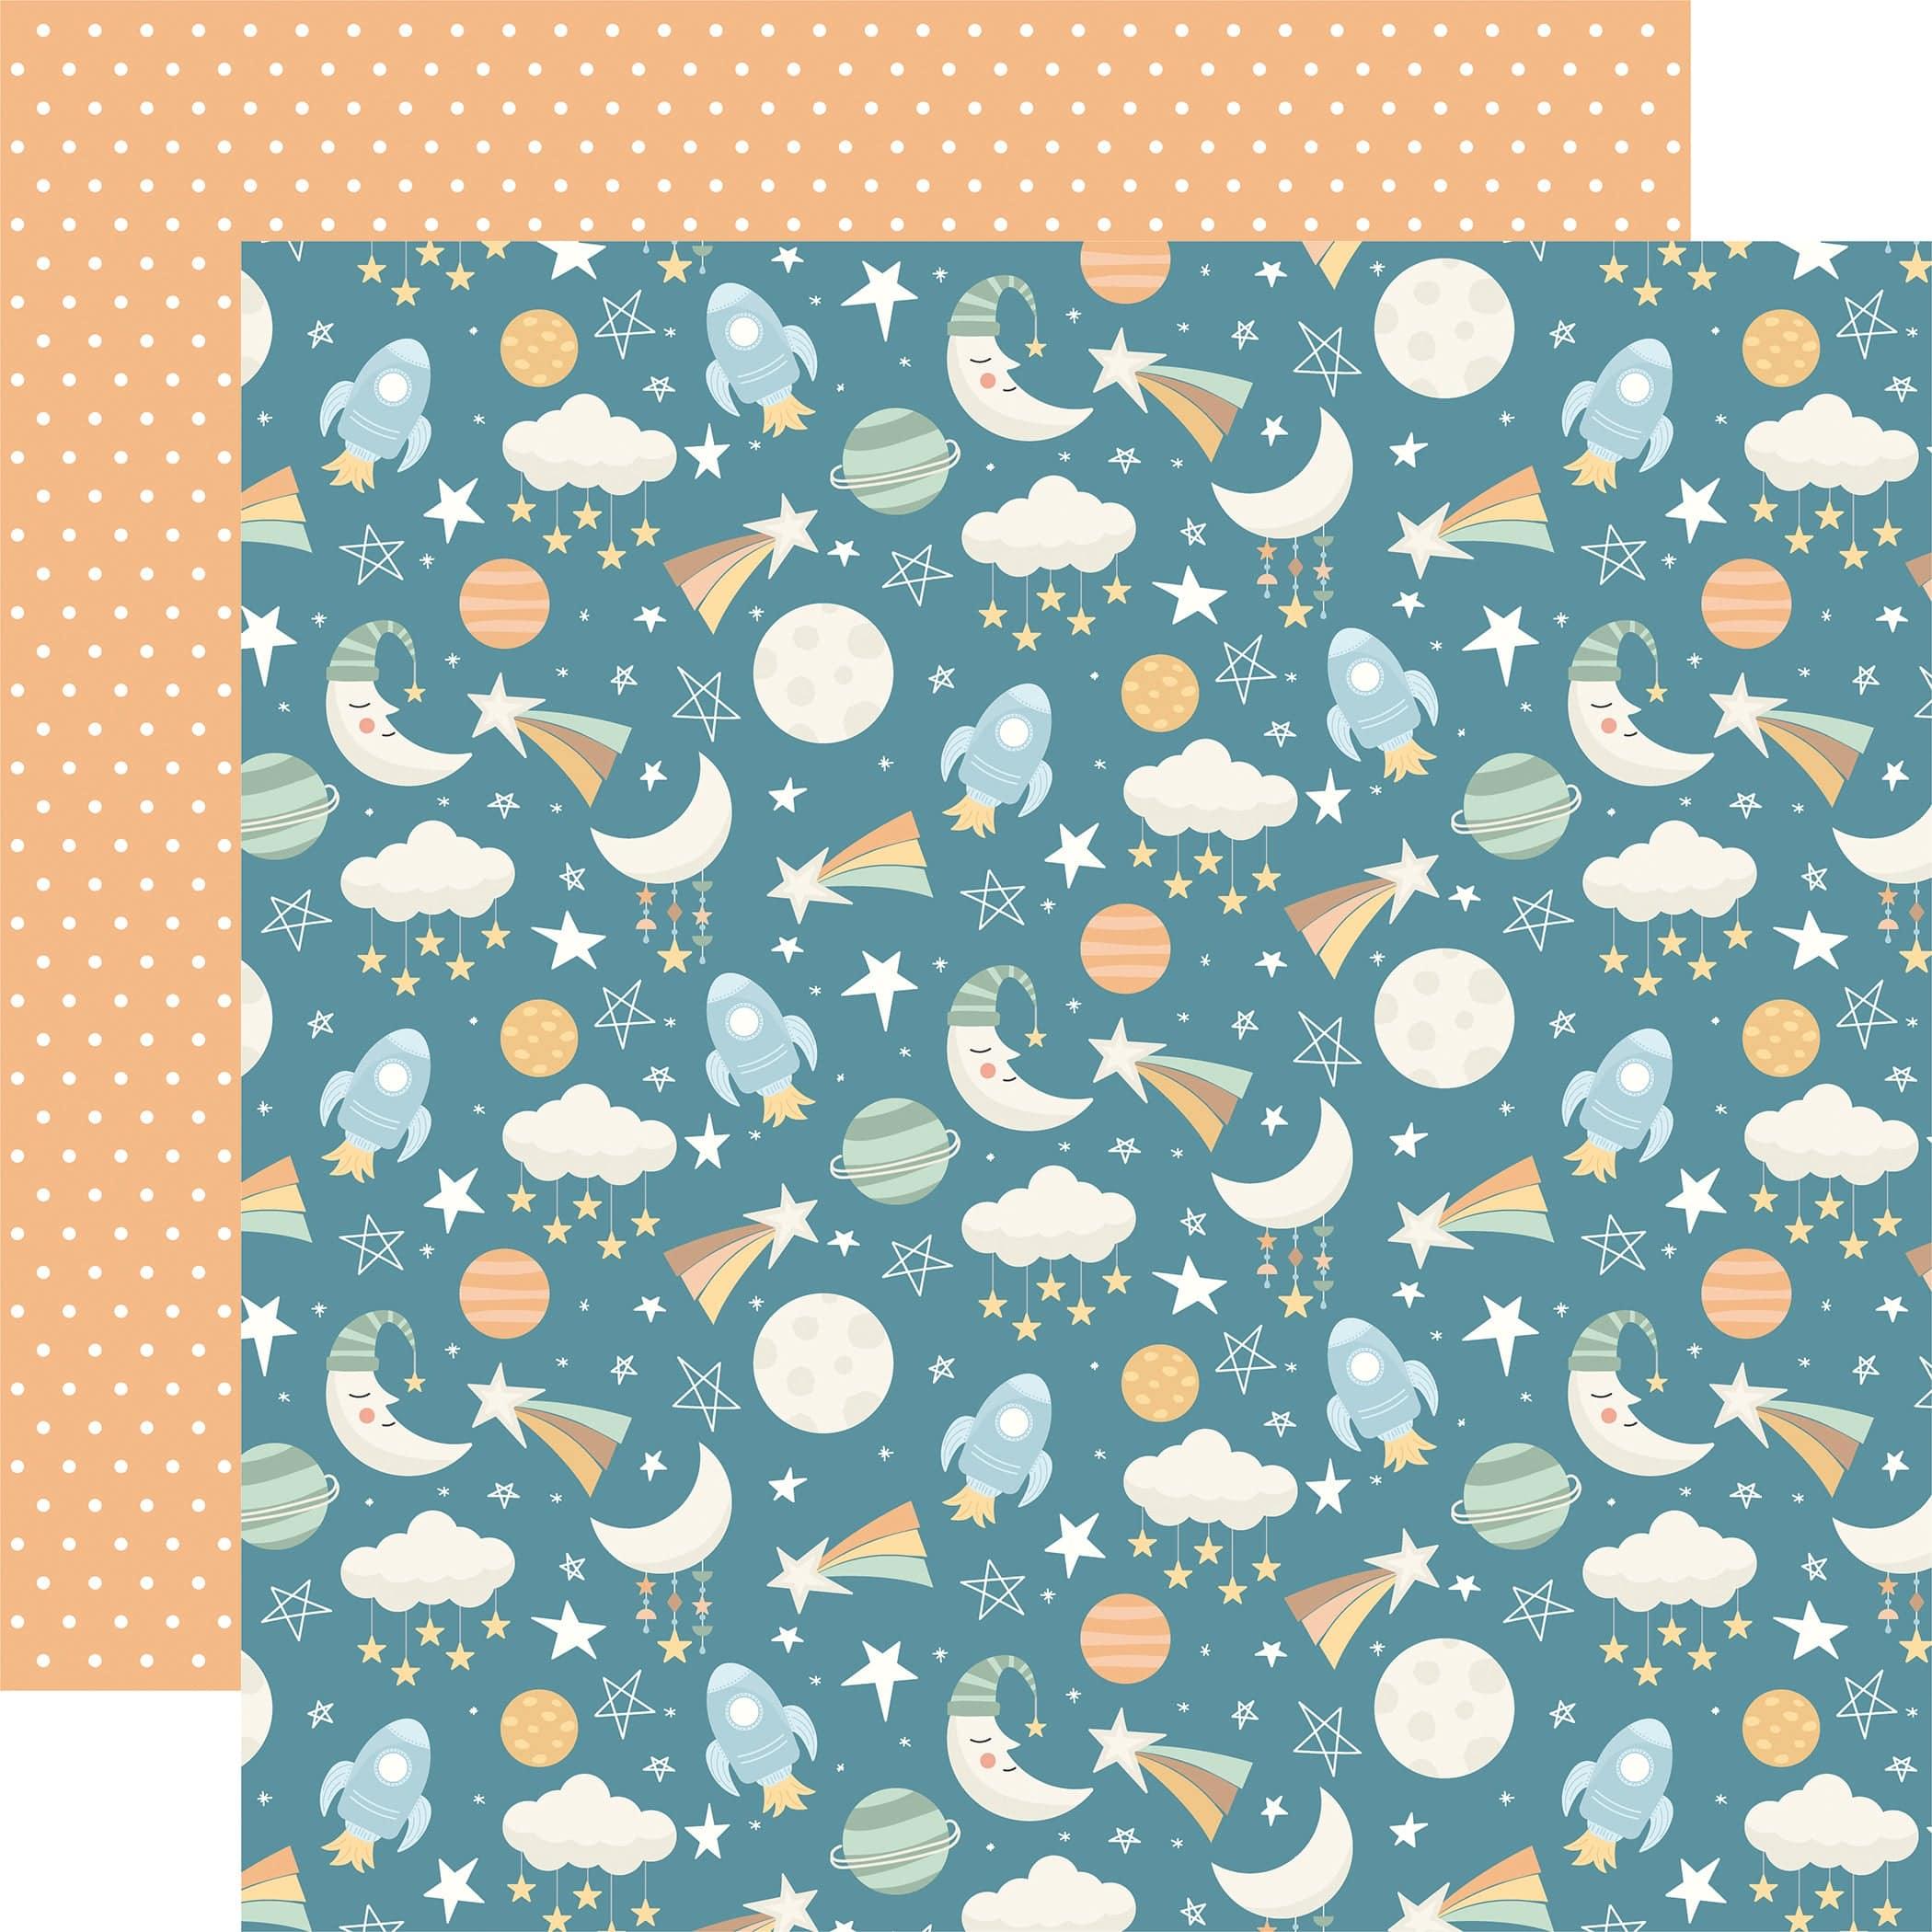 Our Baby Boy Collection Space Dreams 12 x 12 Double-Sided Scrapbook Paper by Echo Park Paper - Scrapbook Supply Companies